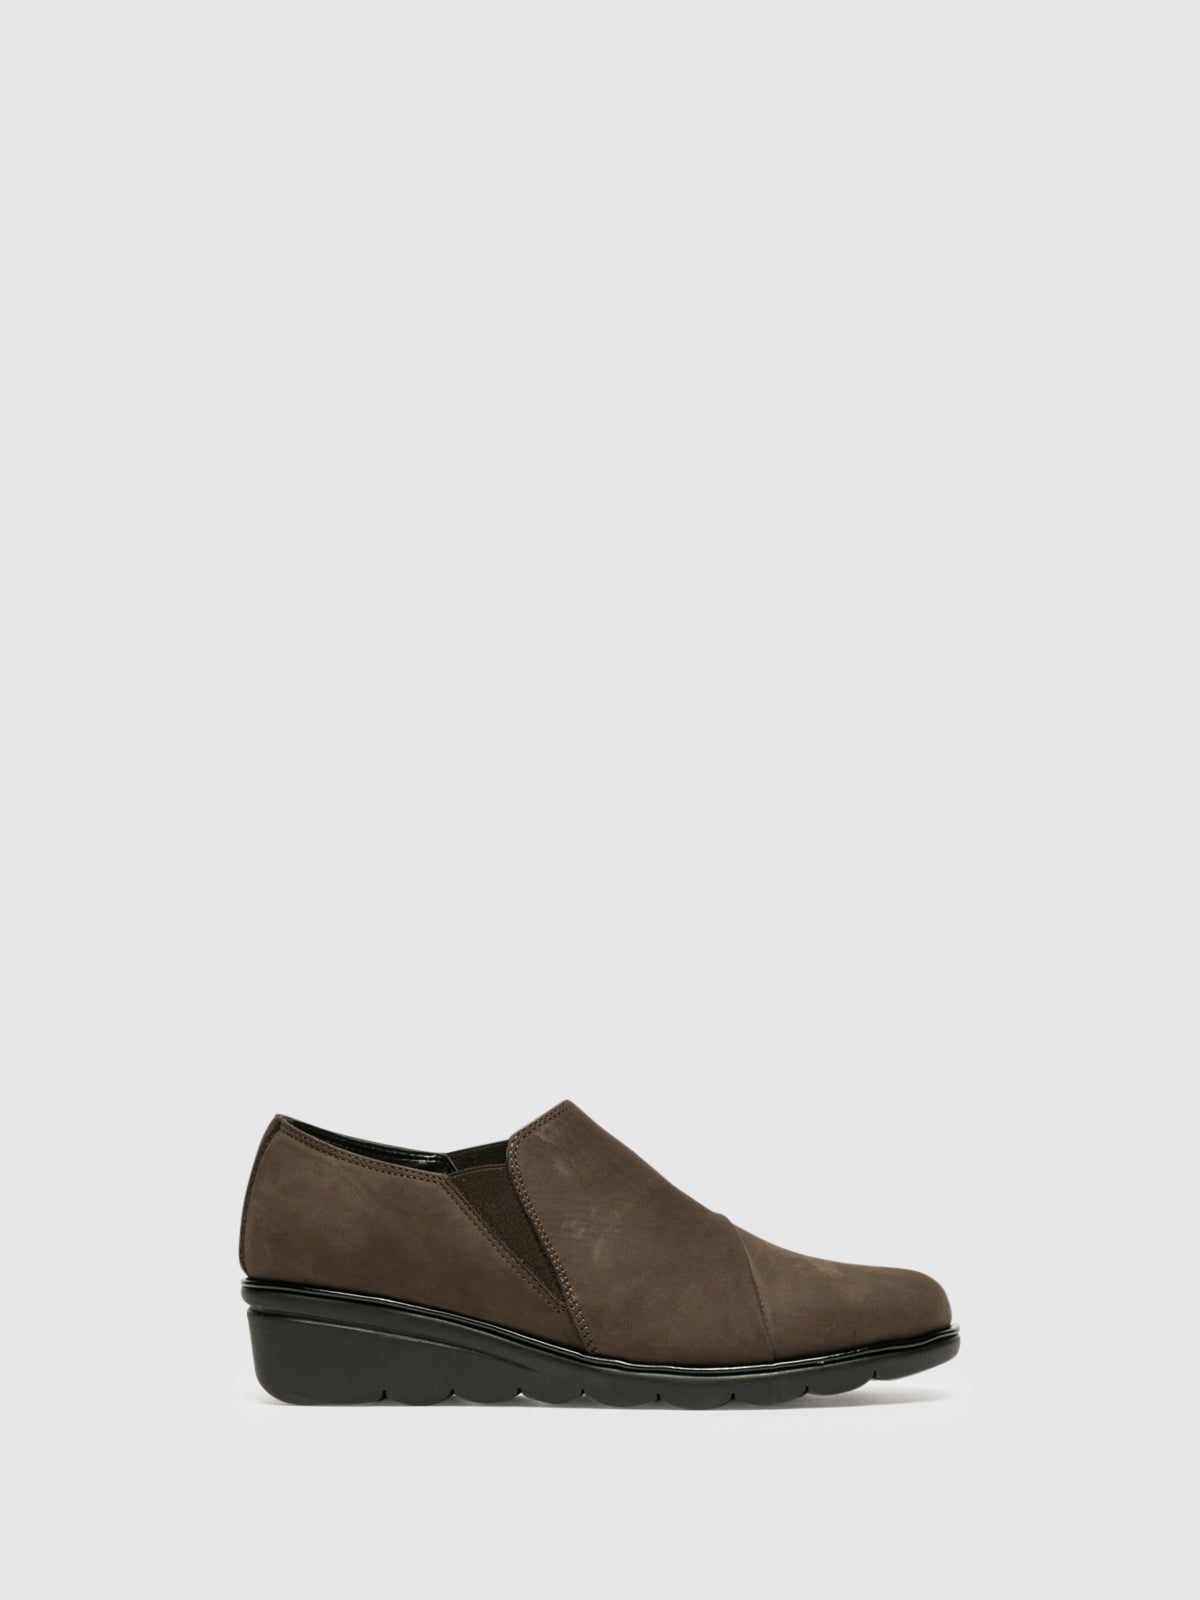 The Flexx Brown Round Toe Shoes